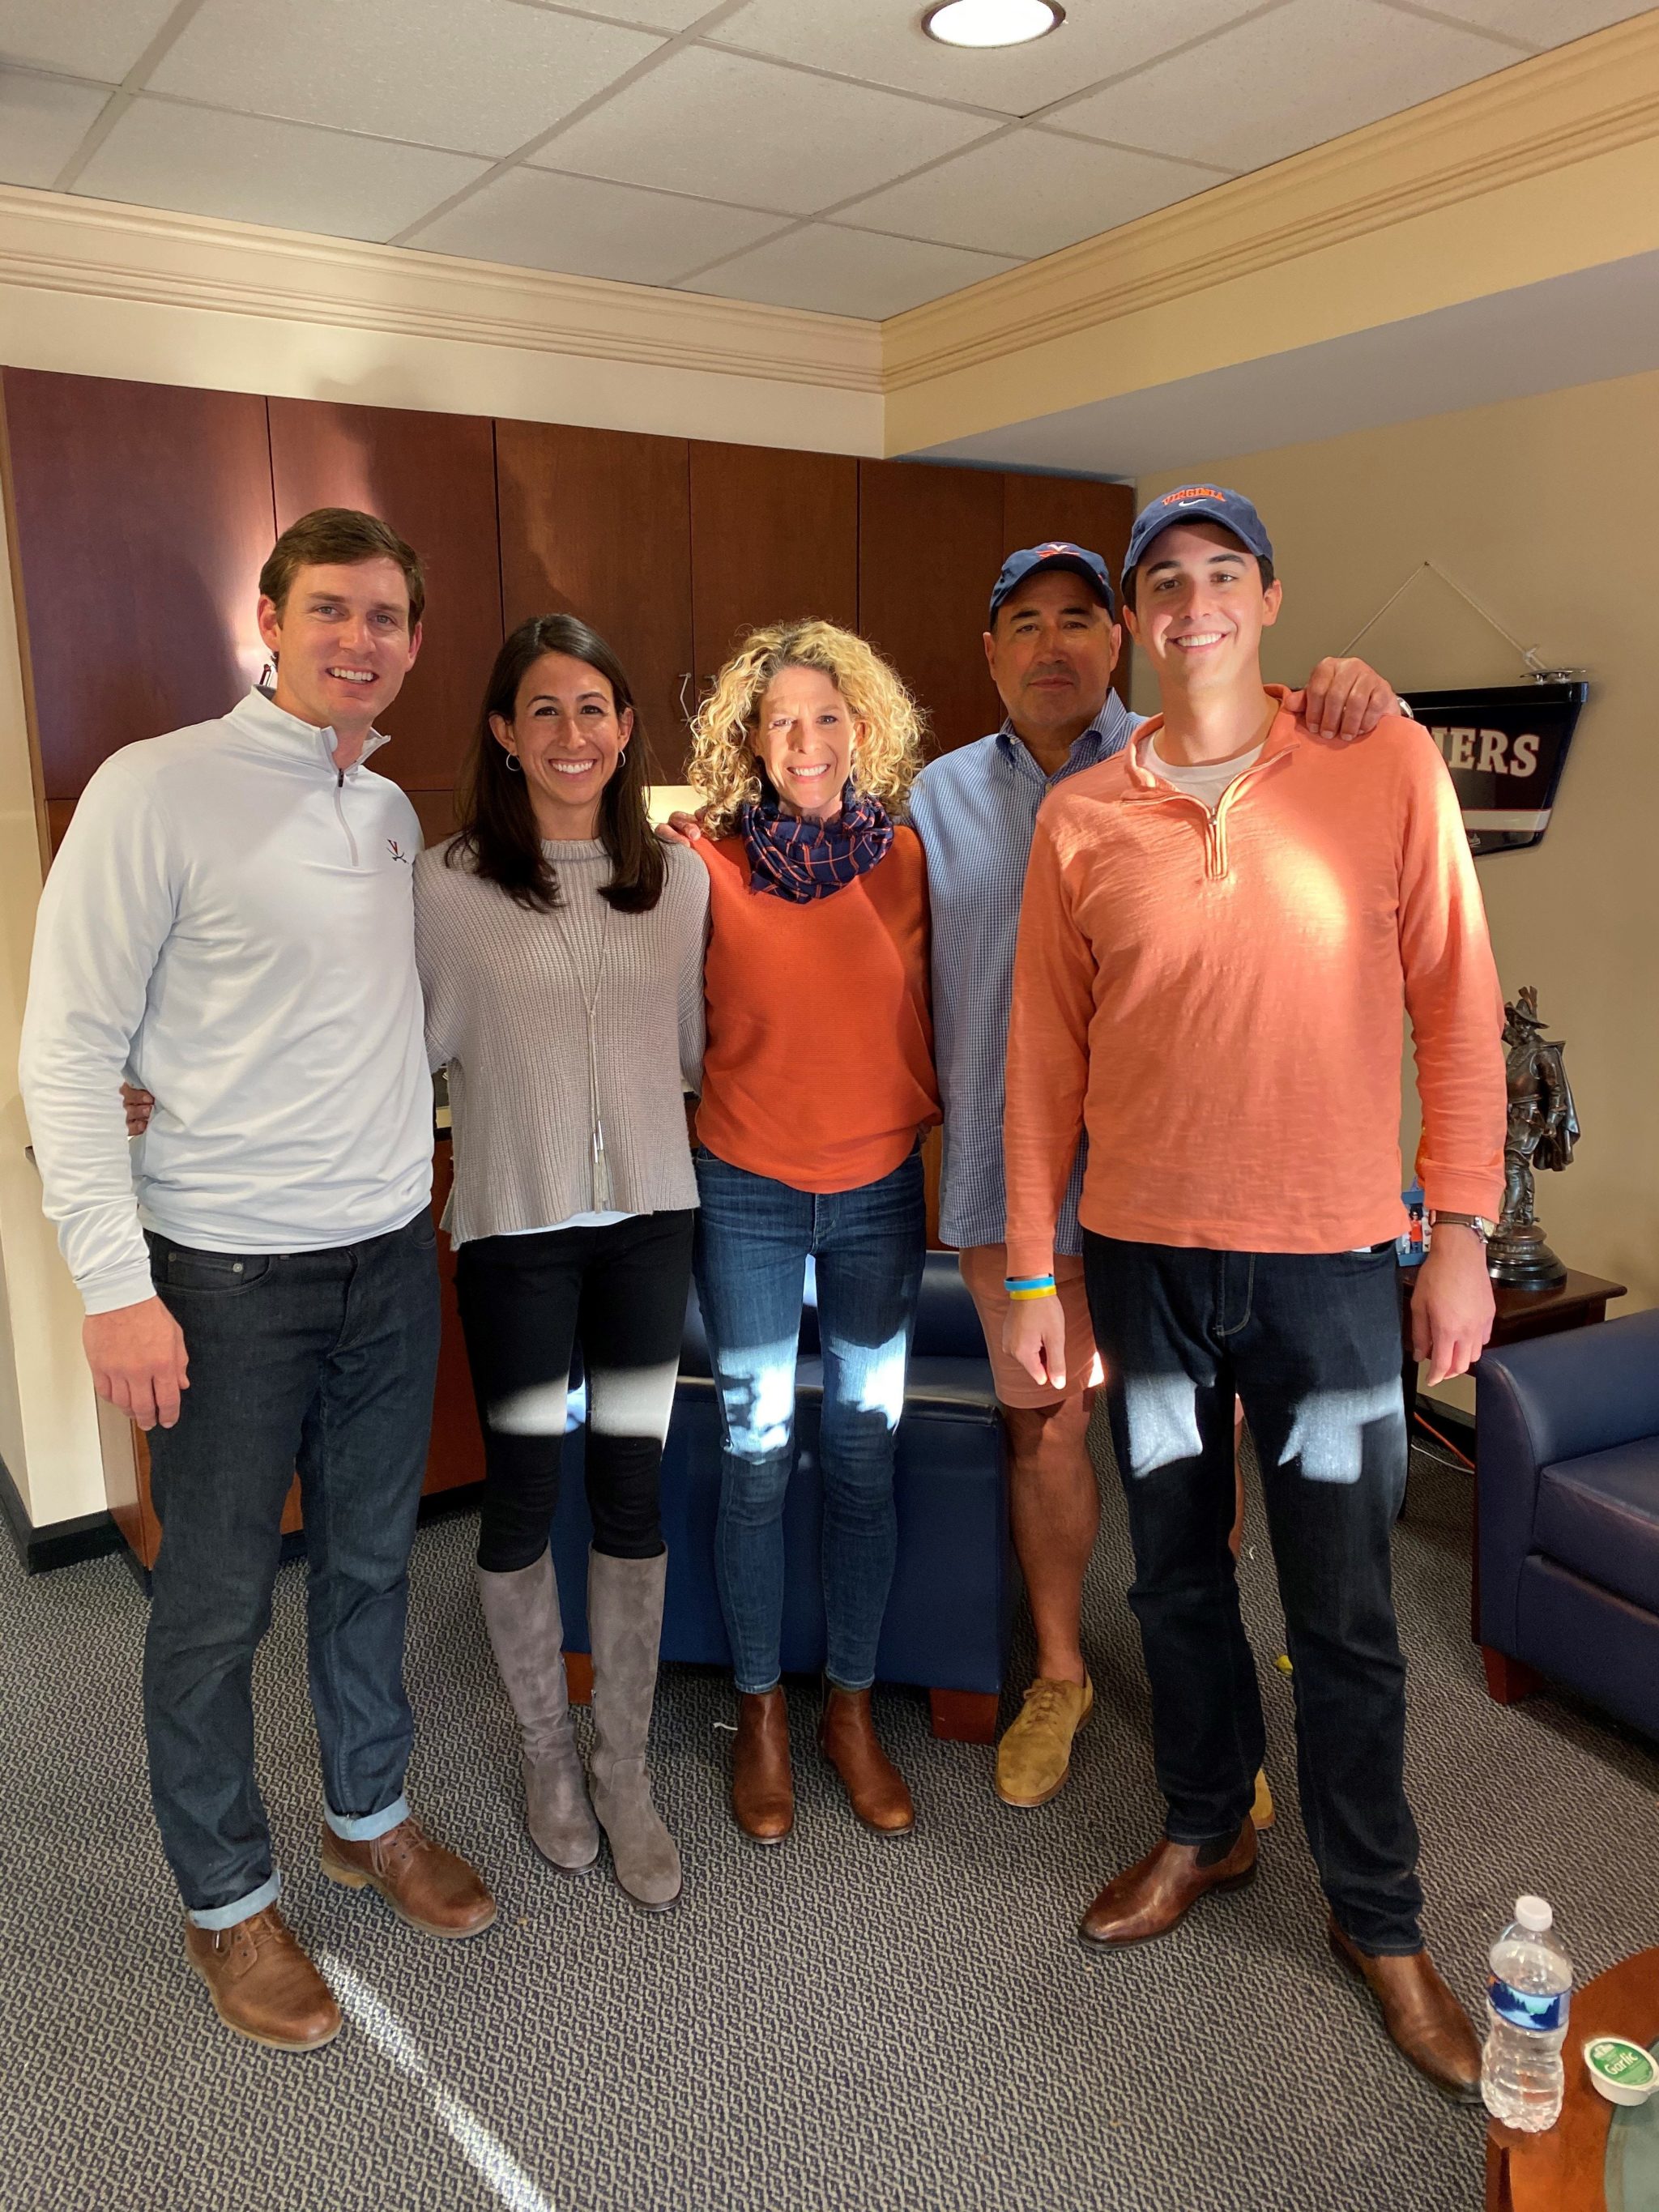 Hilldrup employees at UVA cavaliers event